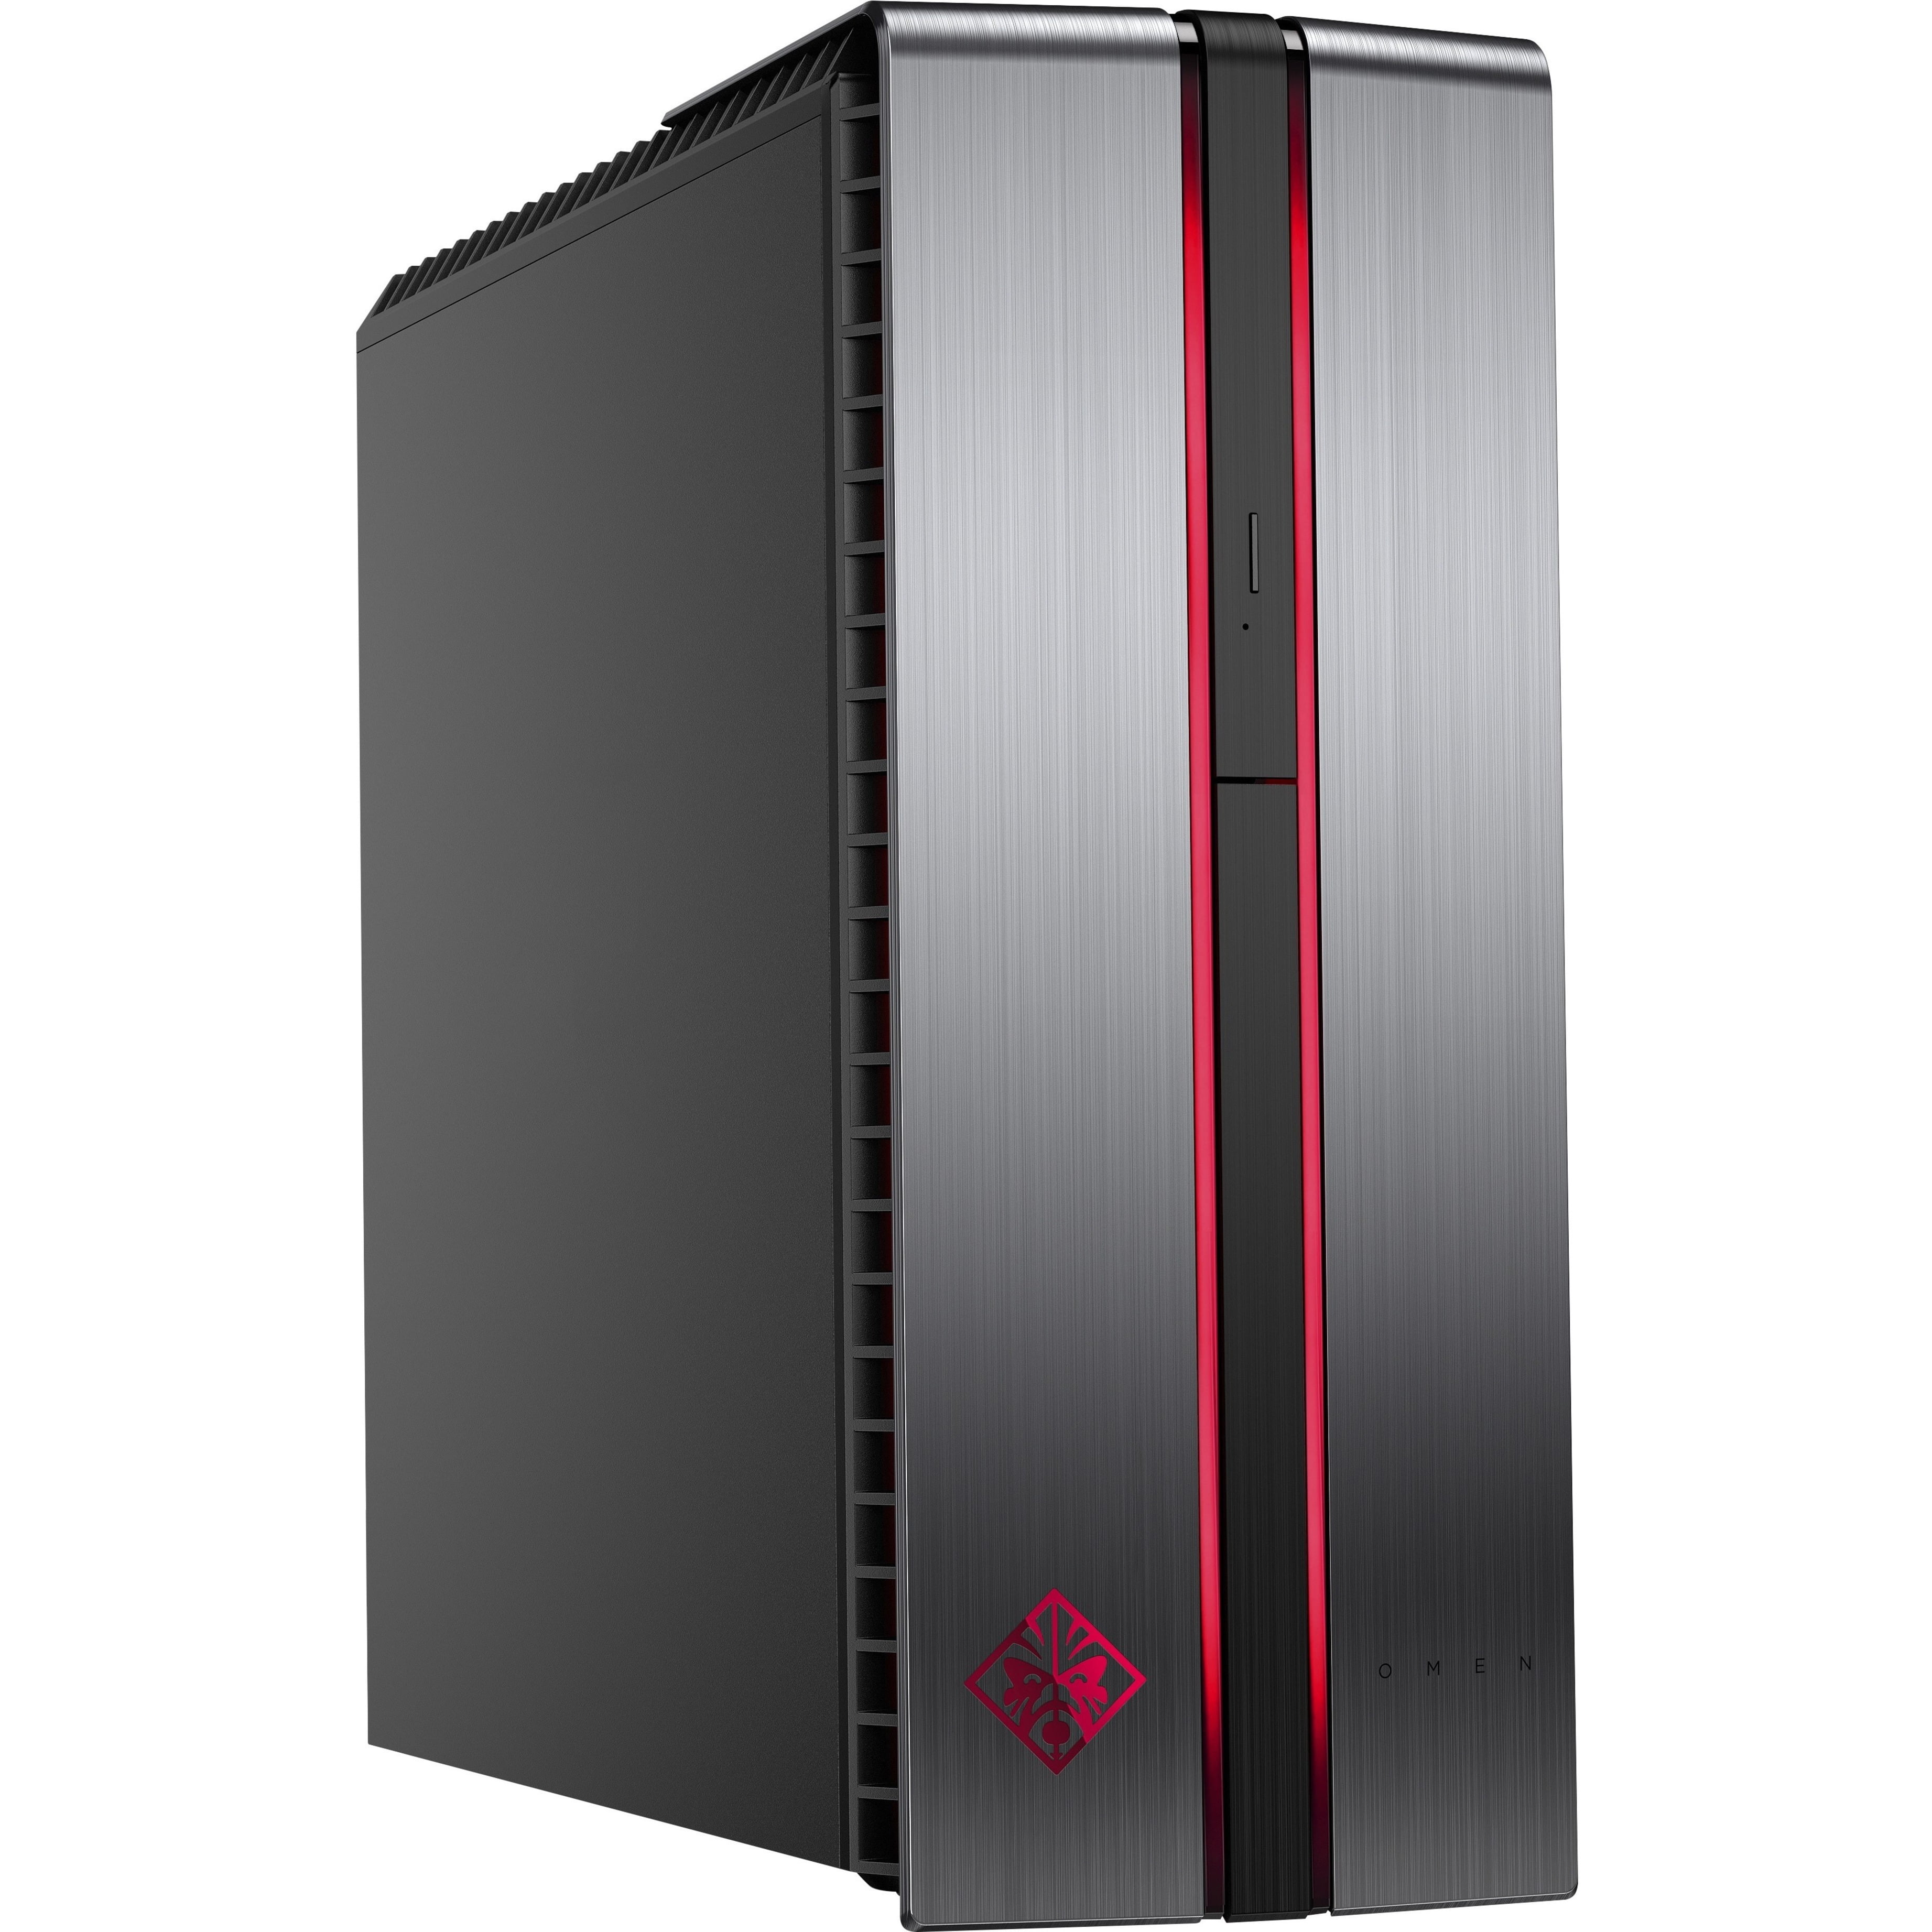 HP OMEN 870-210 Gaming Desktop PC with Intel Core i3-7100